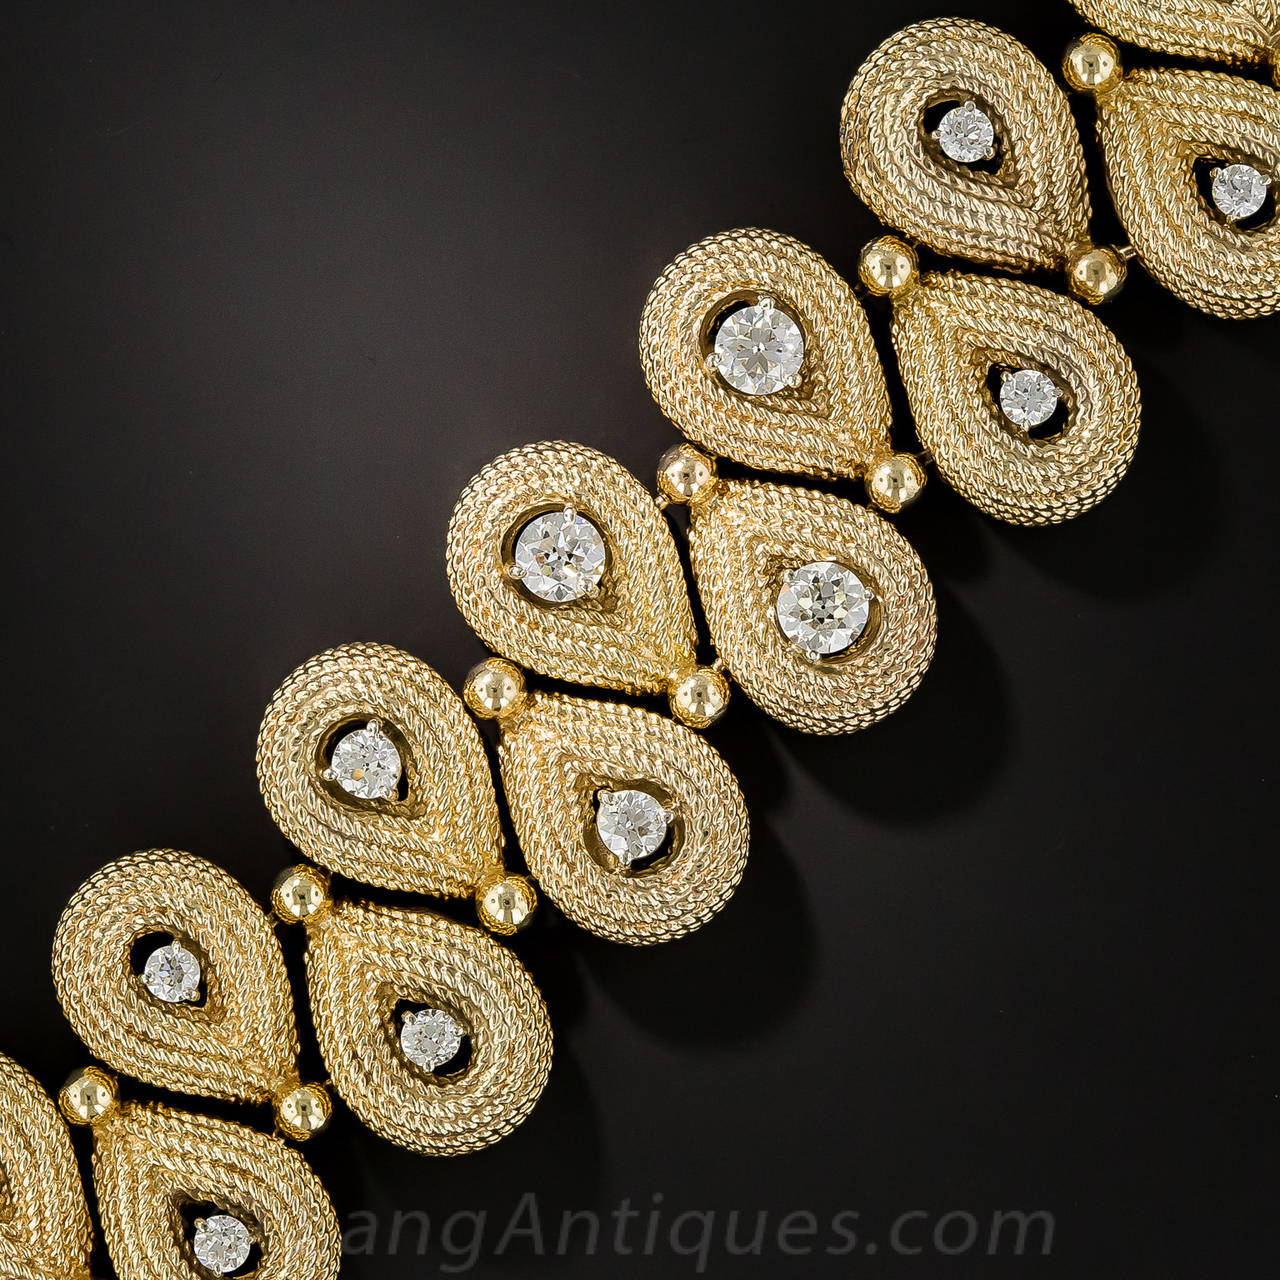 A double row of 11 highly textured 14K pear-shaped links (22 total), each centered with a sparkling white European-cut diamond (evidently extracted and repurposed from an early-20th-century piece of jewelry), comprise this bold and beautiful